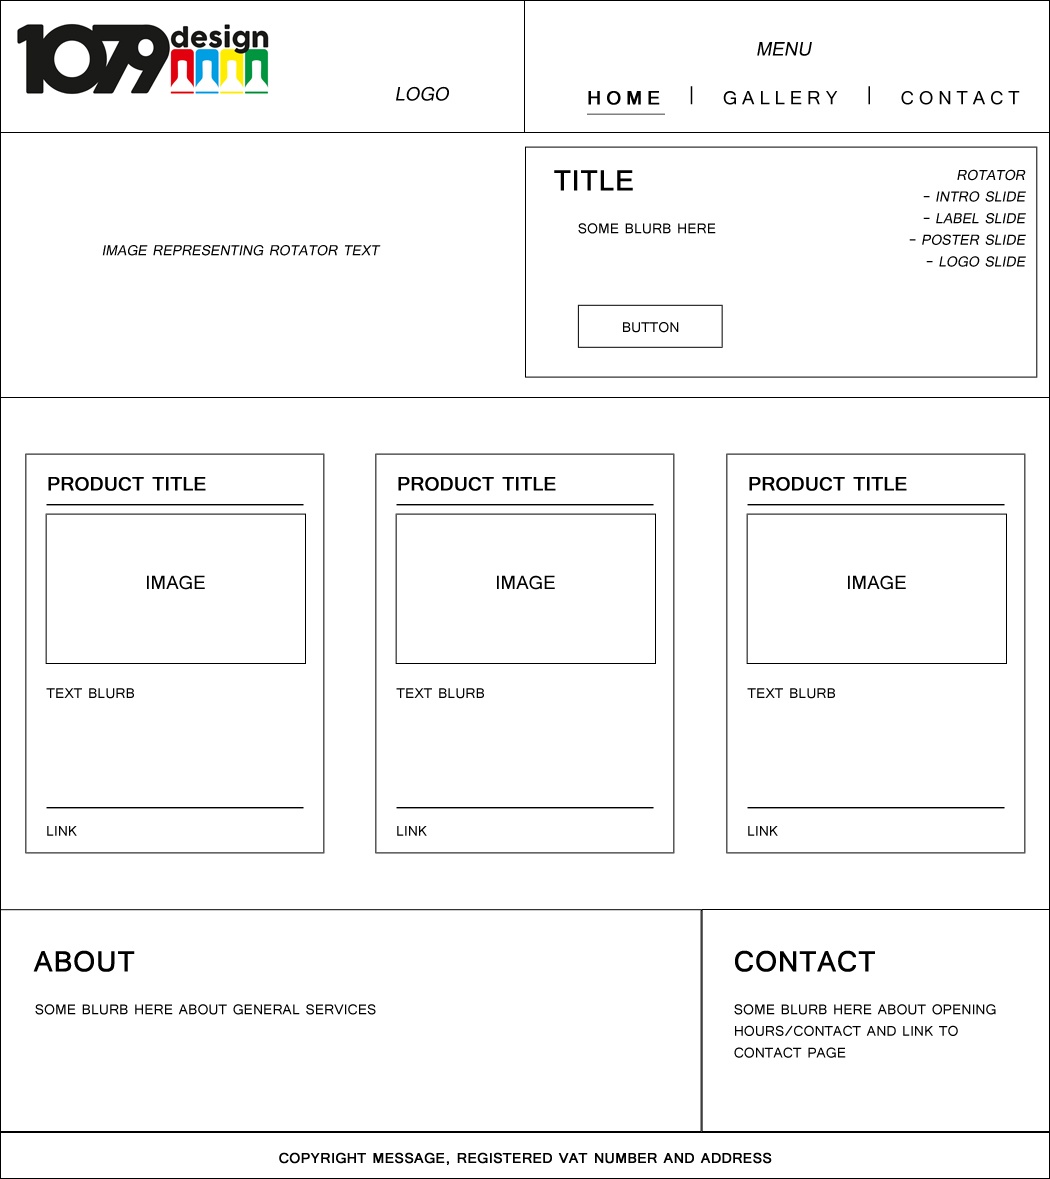 1079design main page wireframe